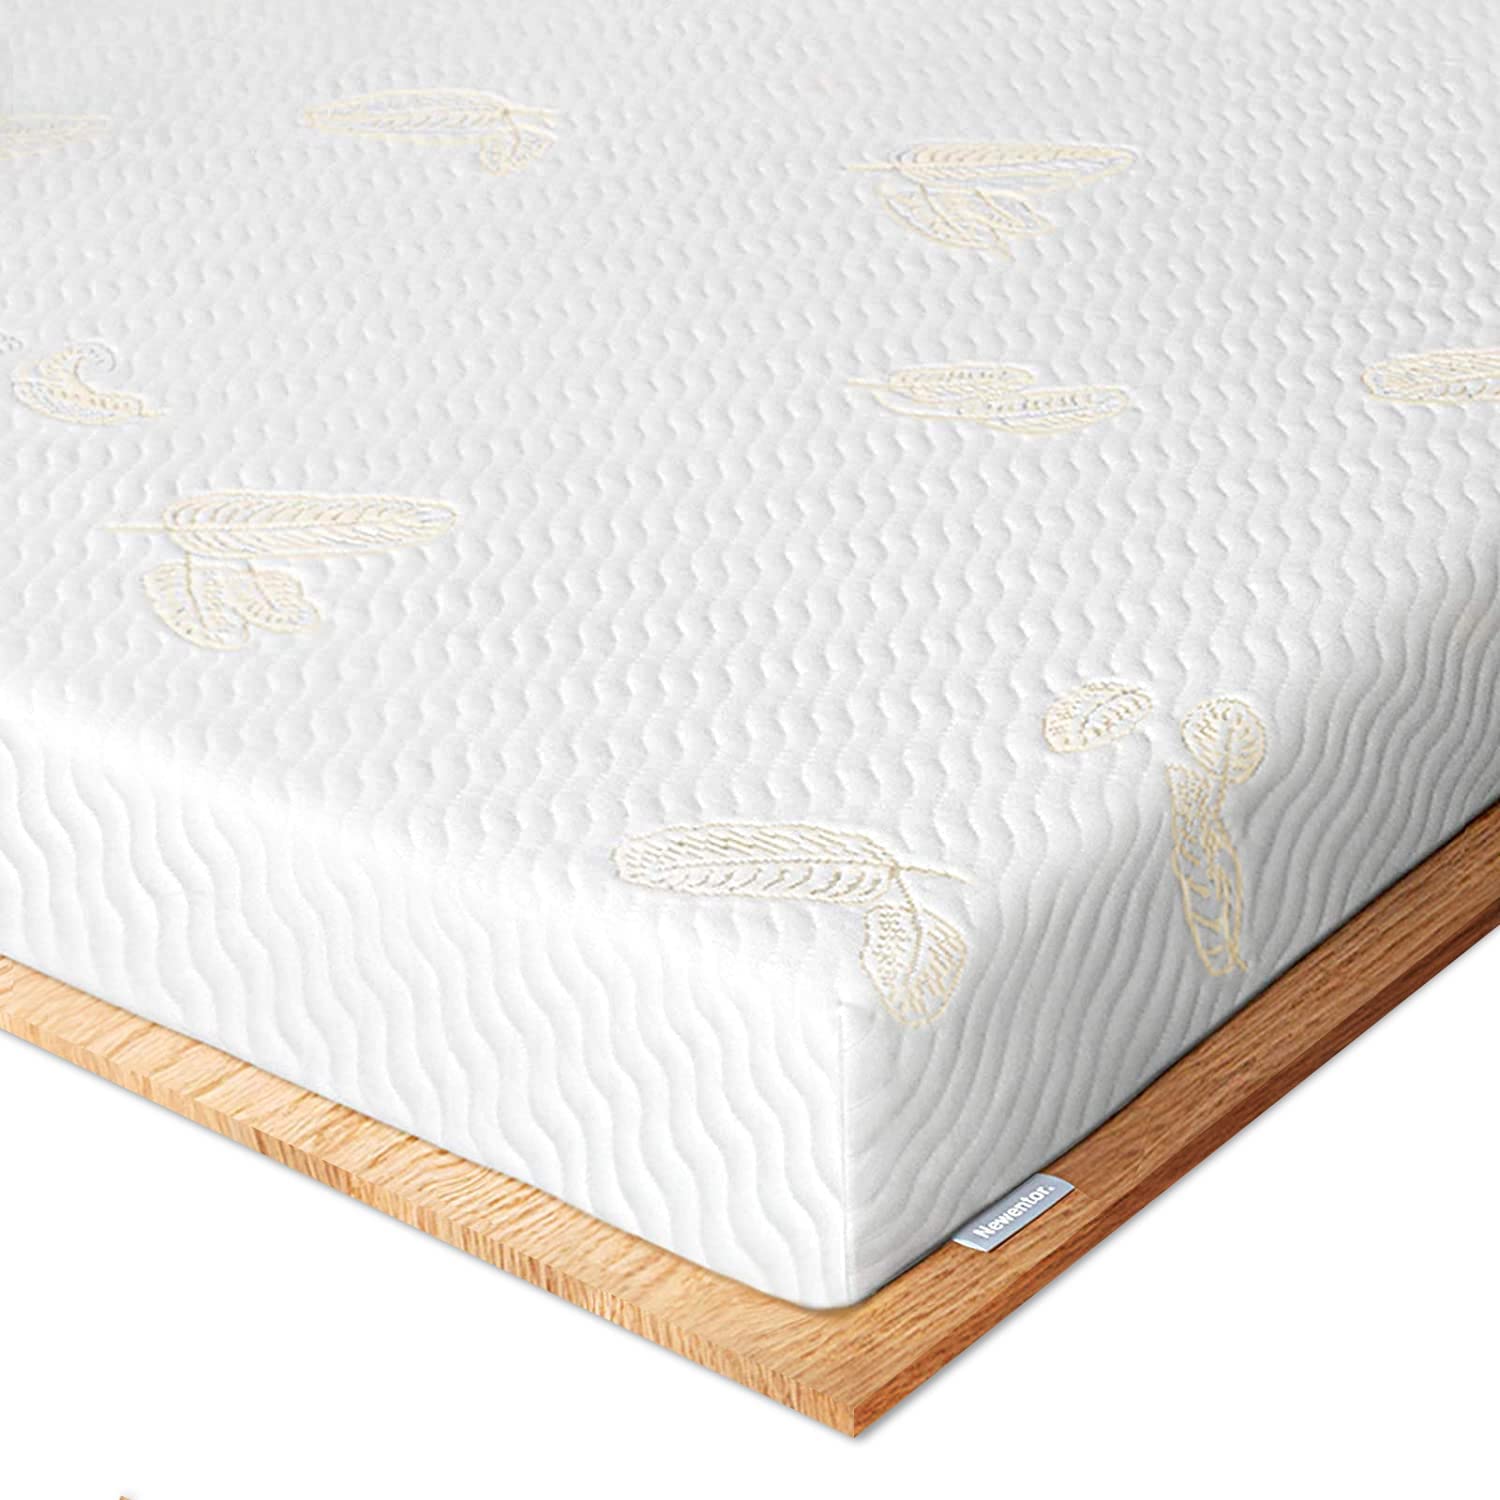 3 inch Non-Slip Design Gel Memory Foam Mattress Topper with Removable &  Washable Cover for Cooling Sleep,Pressure Relief ,CertiPUR-US Certified -  Twin